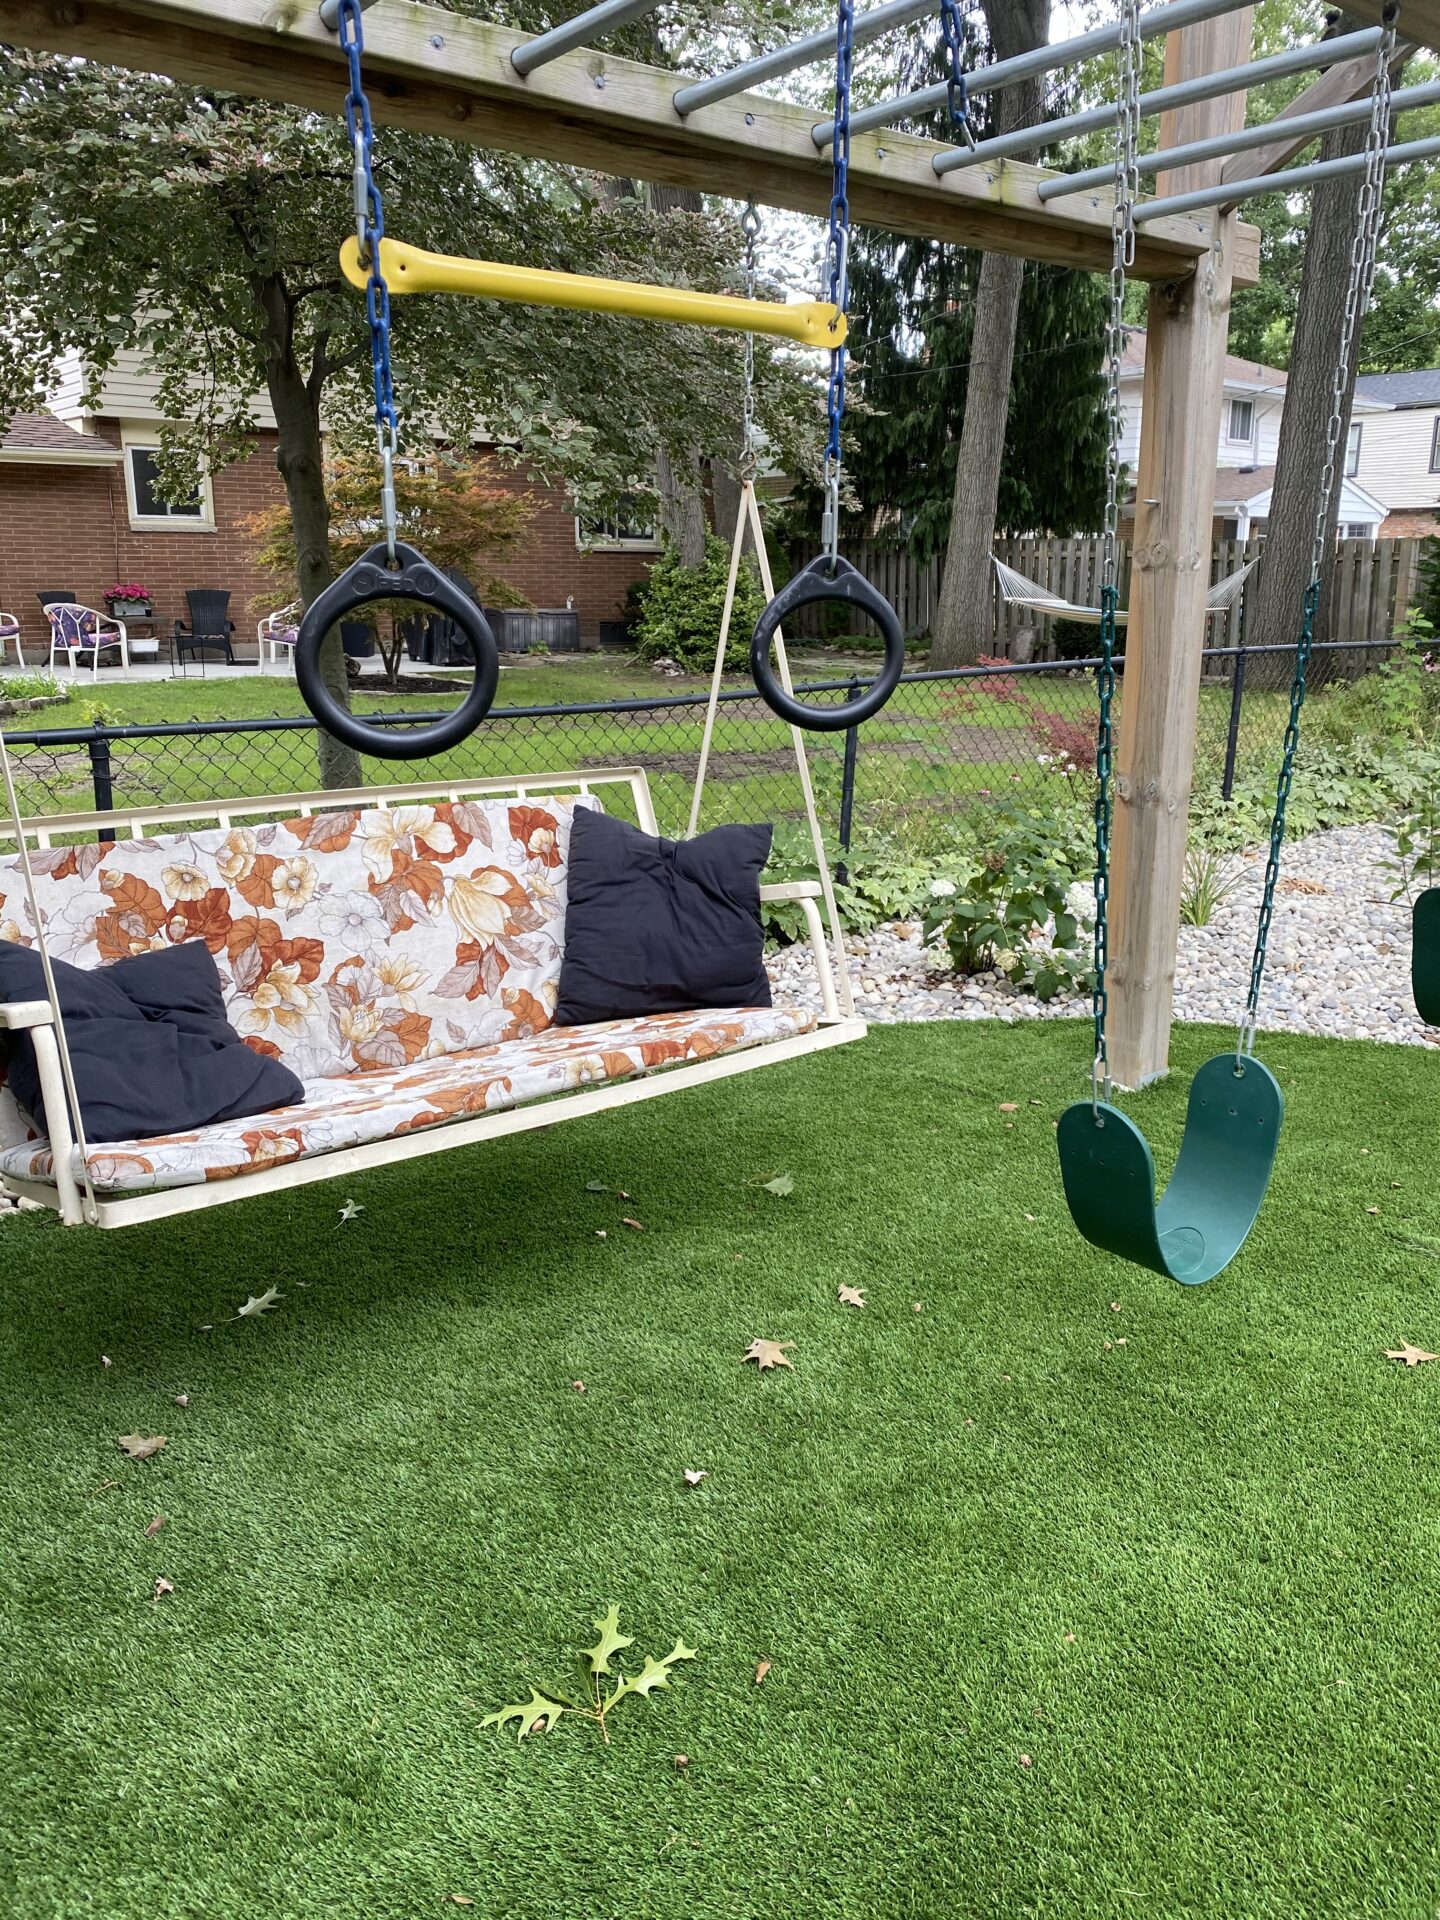 A backyard playset with rings, a swing, and a bench swing over artificial grass, scattered with leaves, adjacent to a pebble path and lawn.